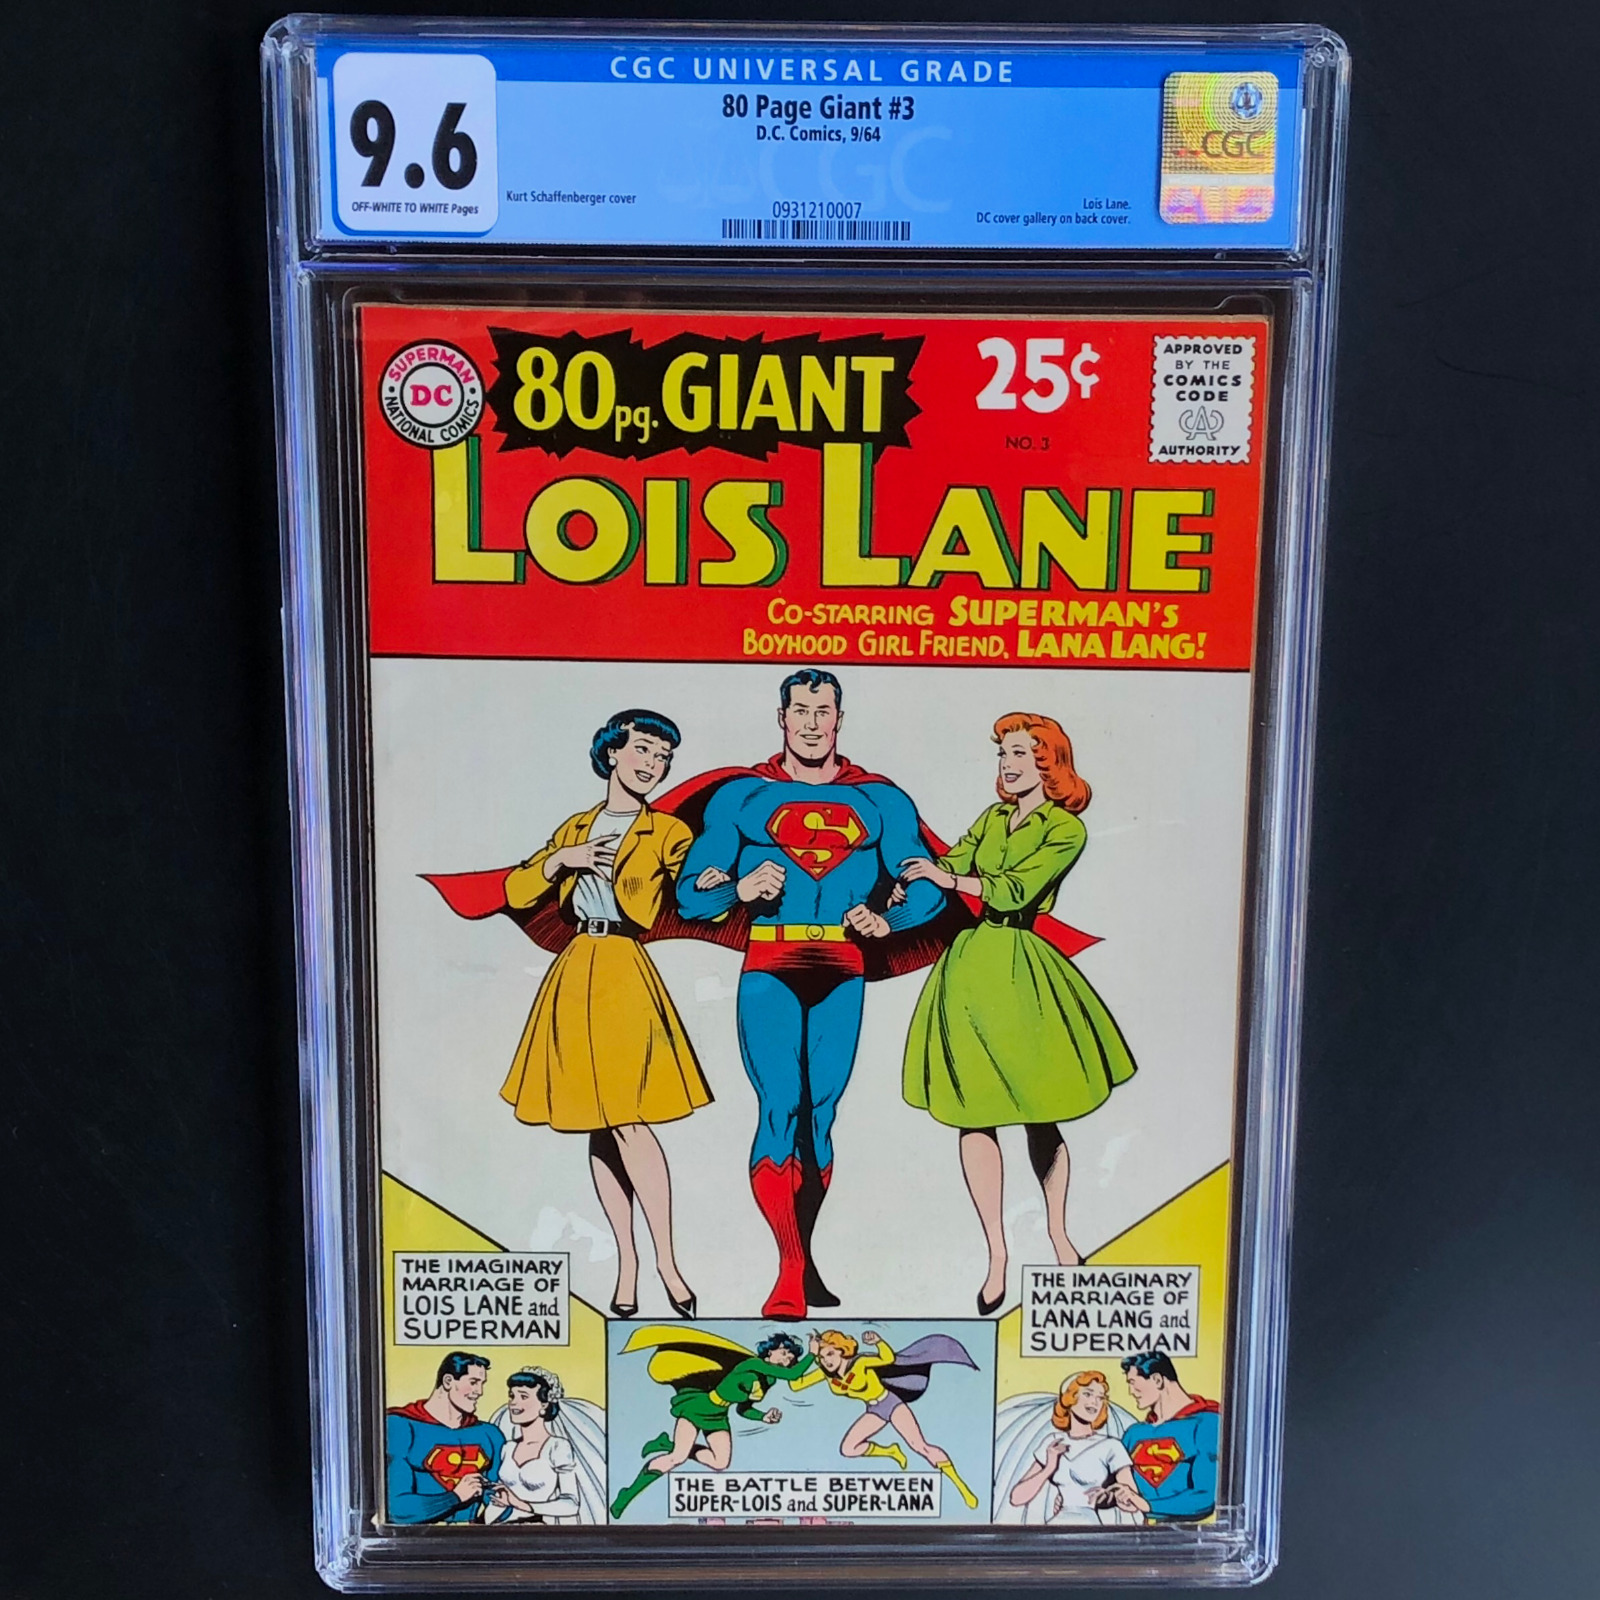 80 PAGE GIANT #3 - LOIS LANE (DC 1964) 💥 CGC 9.6 💥 ONLY 1 HIGHER EIGHTY Pg